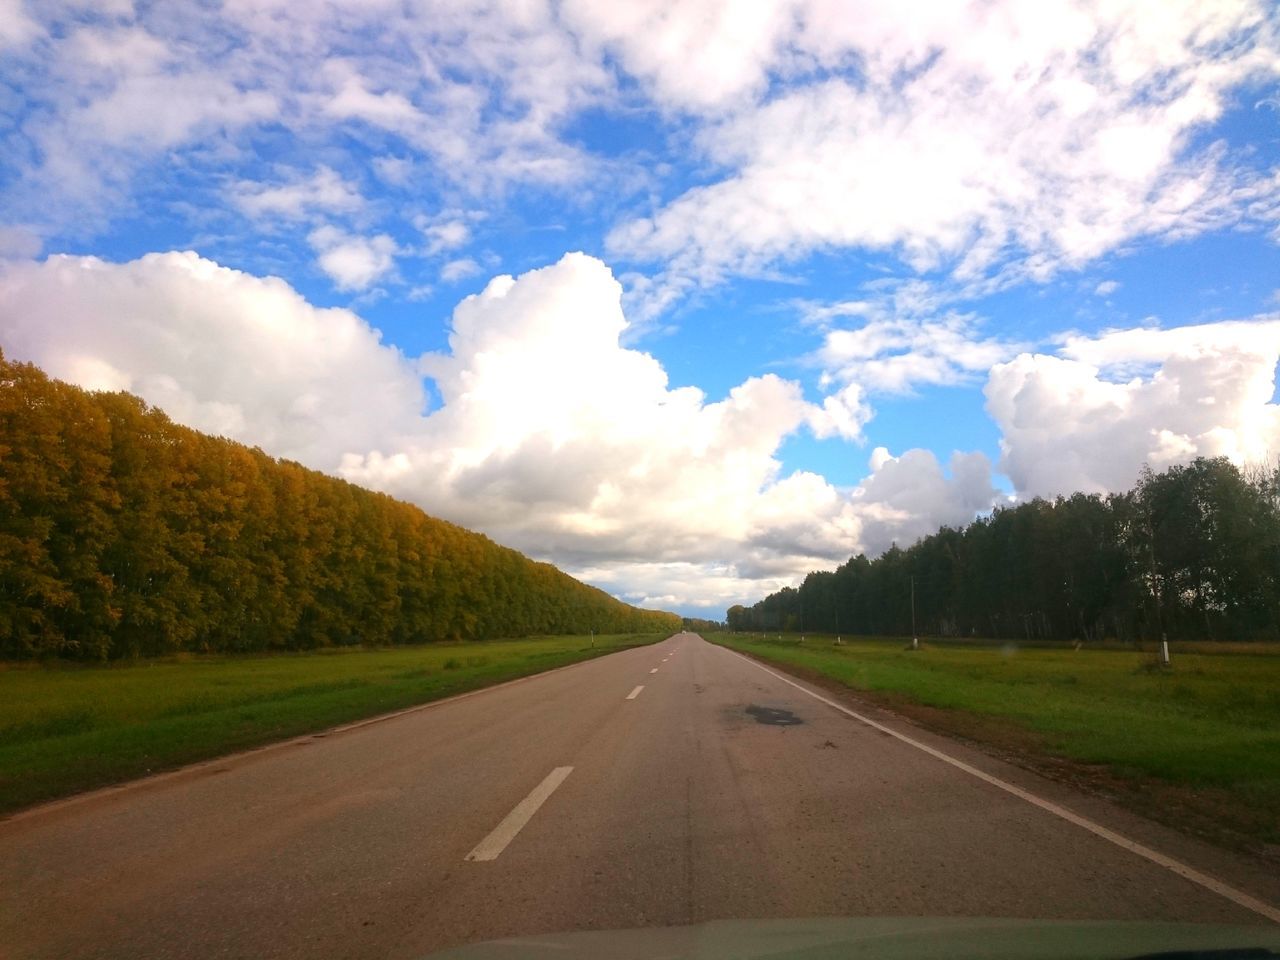 road, transportation, the way forward, road marking, sky, tree, tranquil scene, diminishing perspective, landscape, cloud, long, tranquility, vanishing point, solitude, cloud - sky, day, blue, outdoors, nature, country road, cloudy, countryside, cumulus cloud, white line, non-urban scene, grass area, remote, green color, surface level, dividing line, beauty in nature, scenics, straight